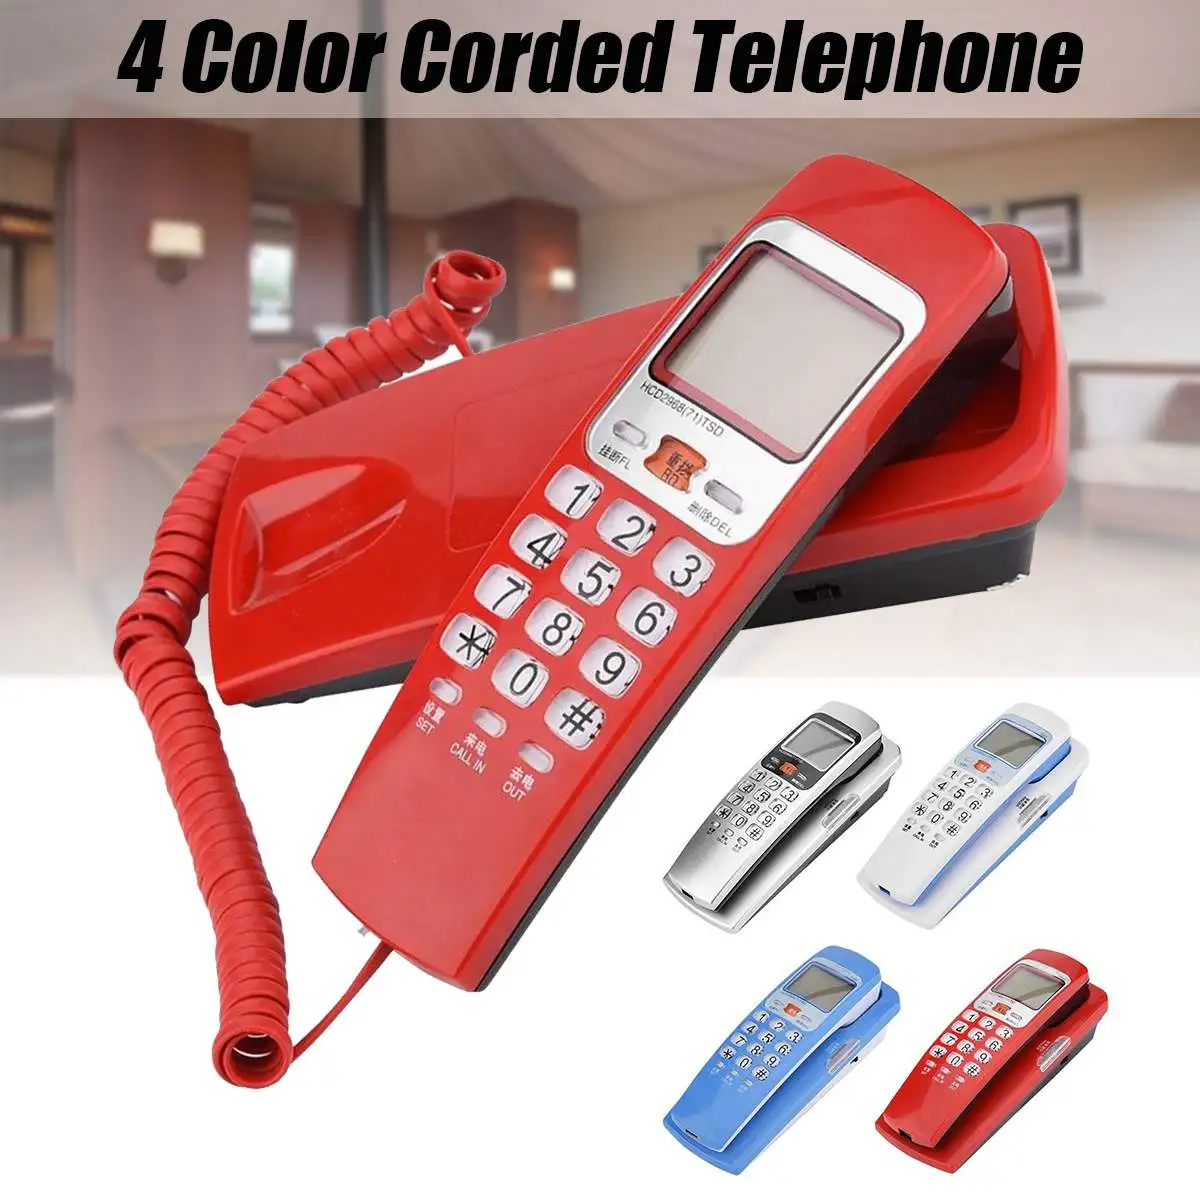 

Wall Mount Caller ID Telephone Corded Phone Big Button Desk Put Landline Fashion Extension Telephone for Home Business Office